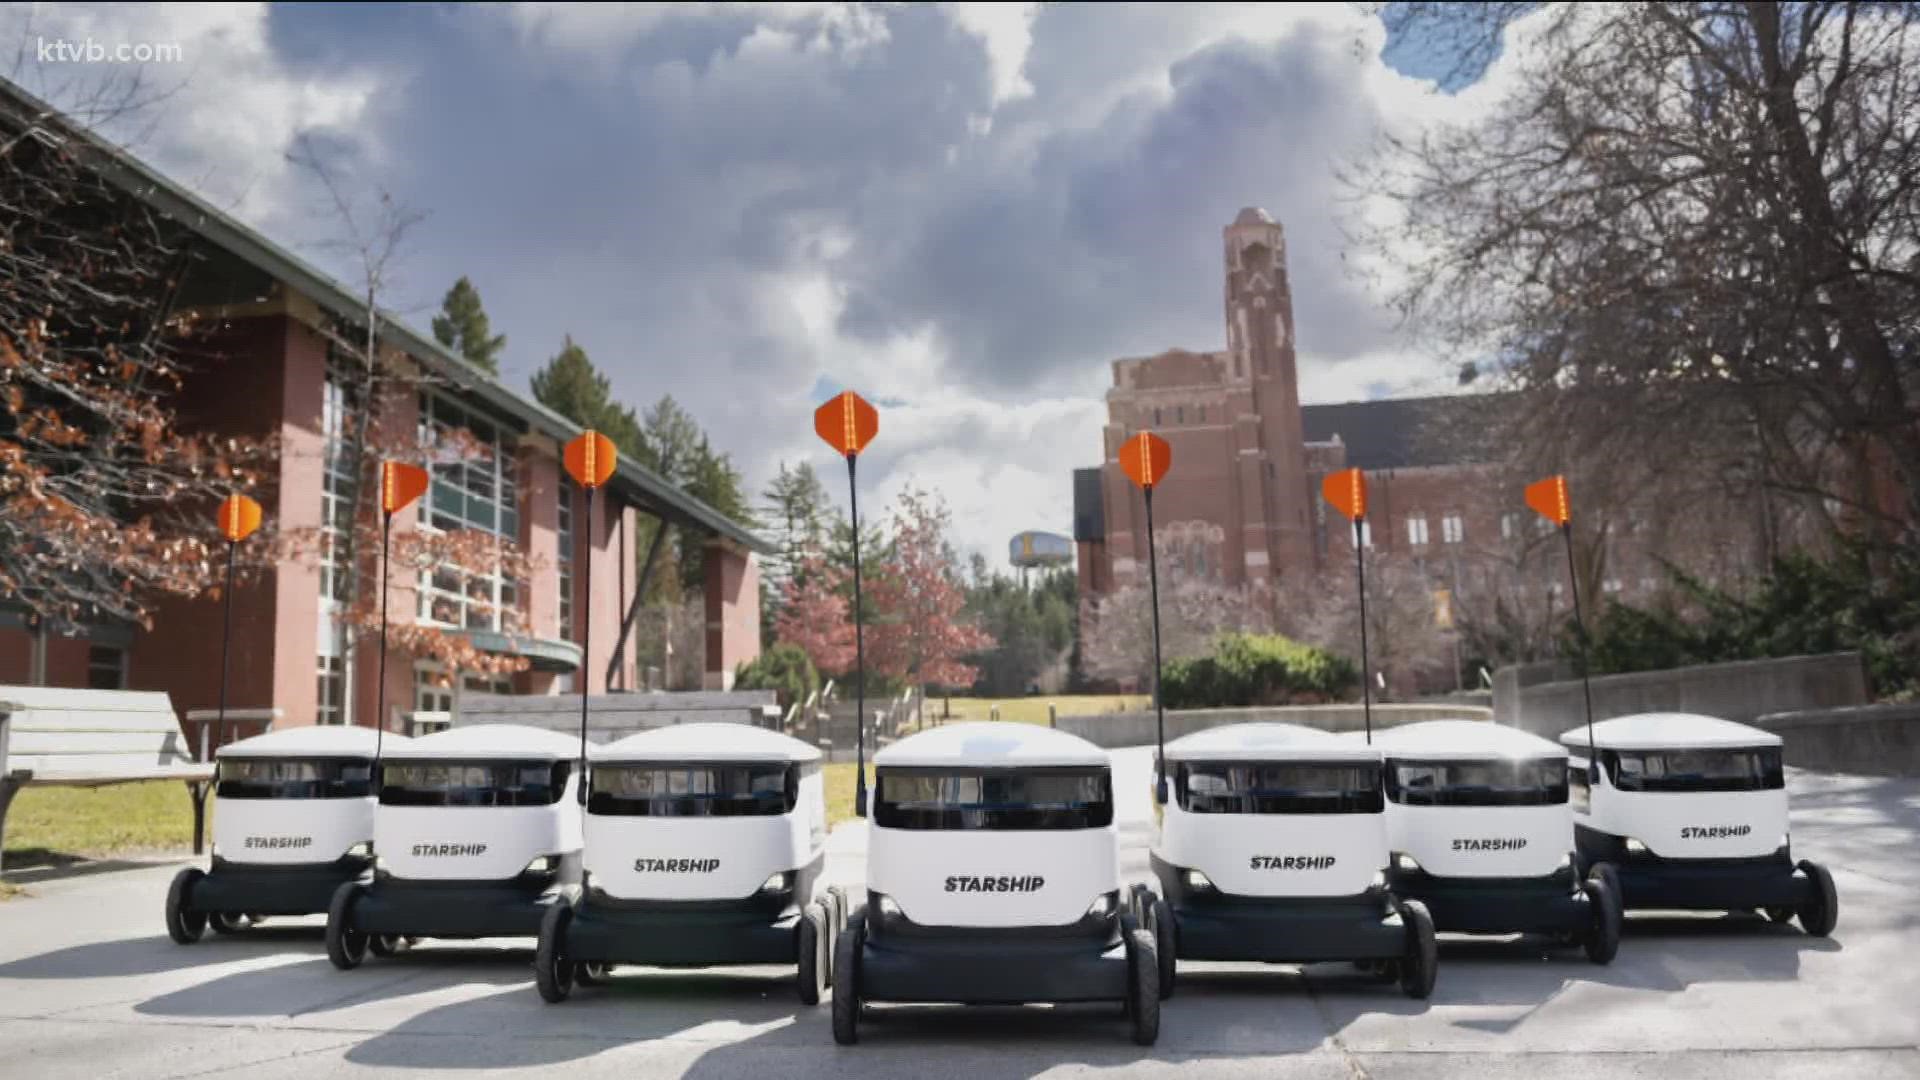 The 15-robot fleet, known as Starship, will deliver food from several Idaho Eats locations to students on the Moscow campus.